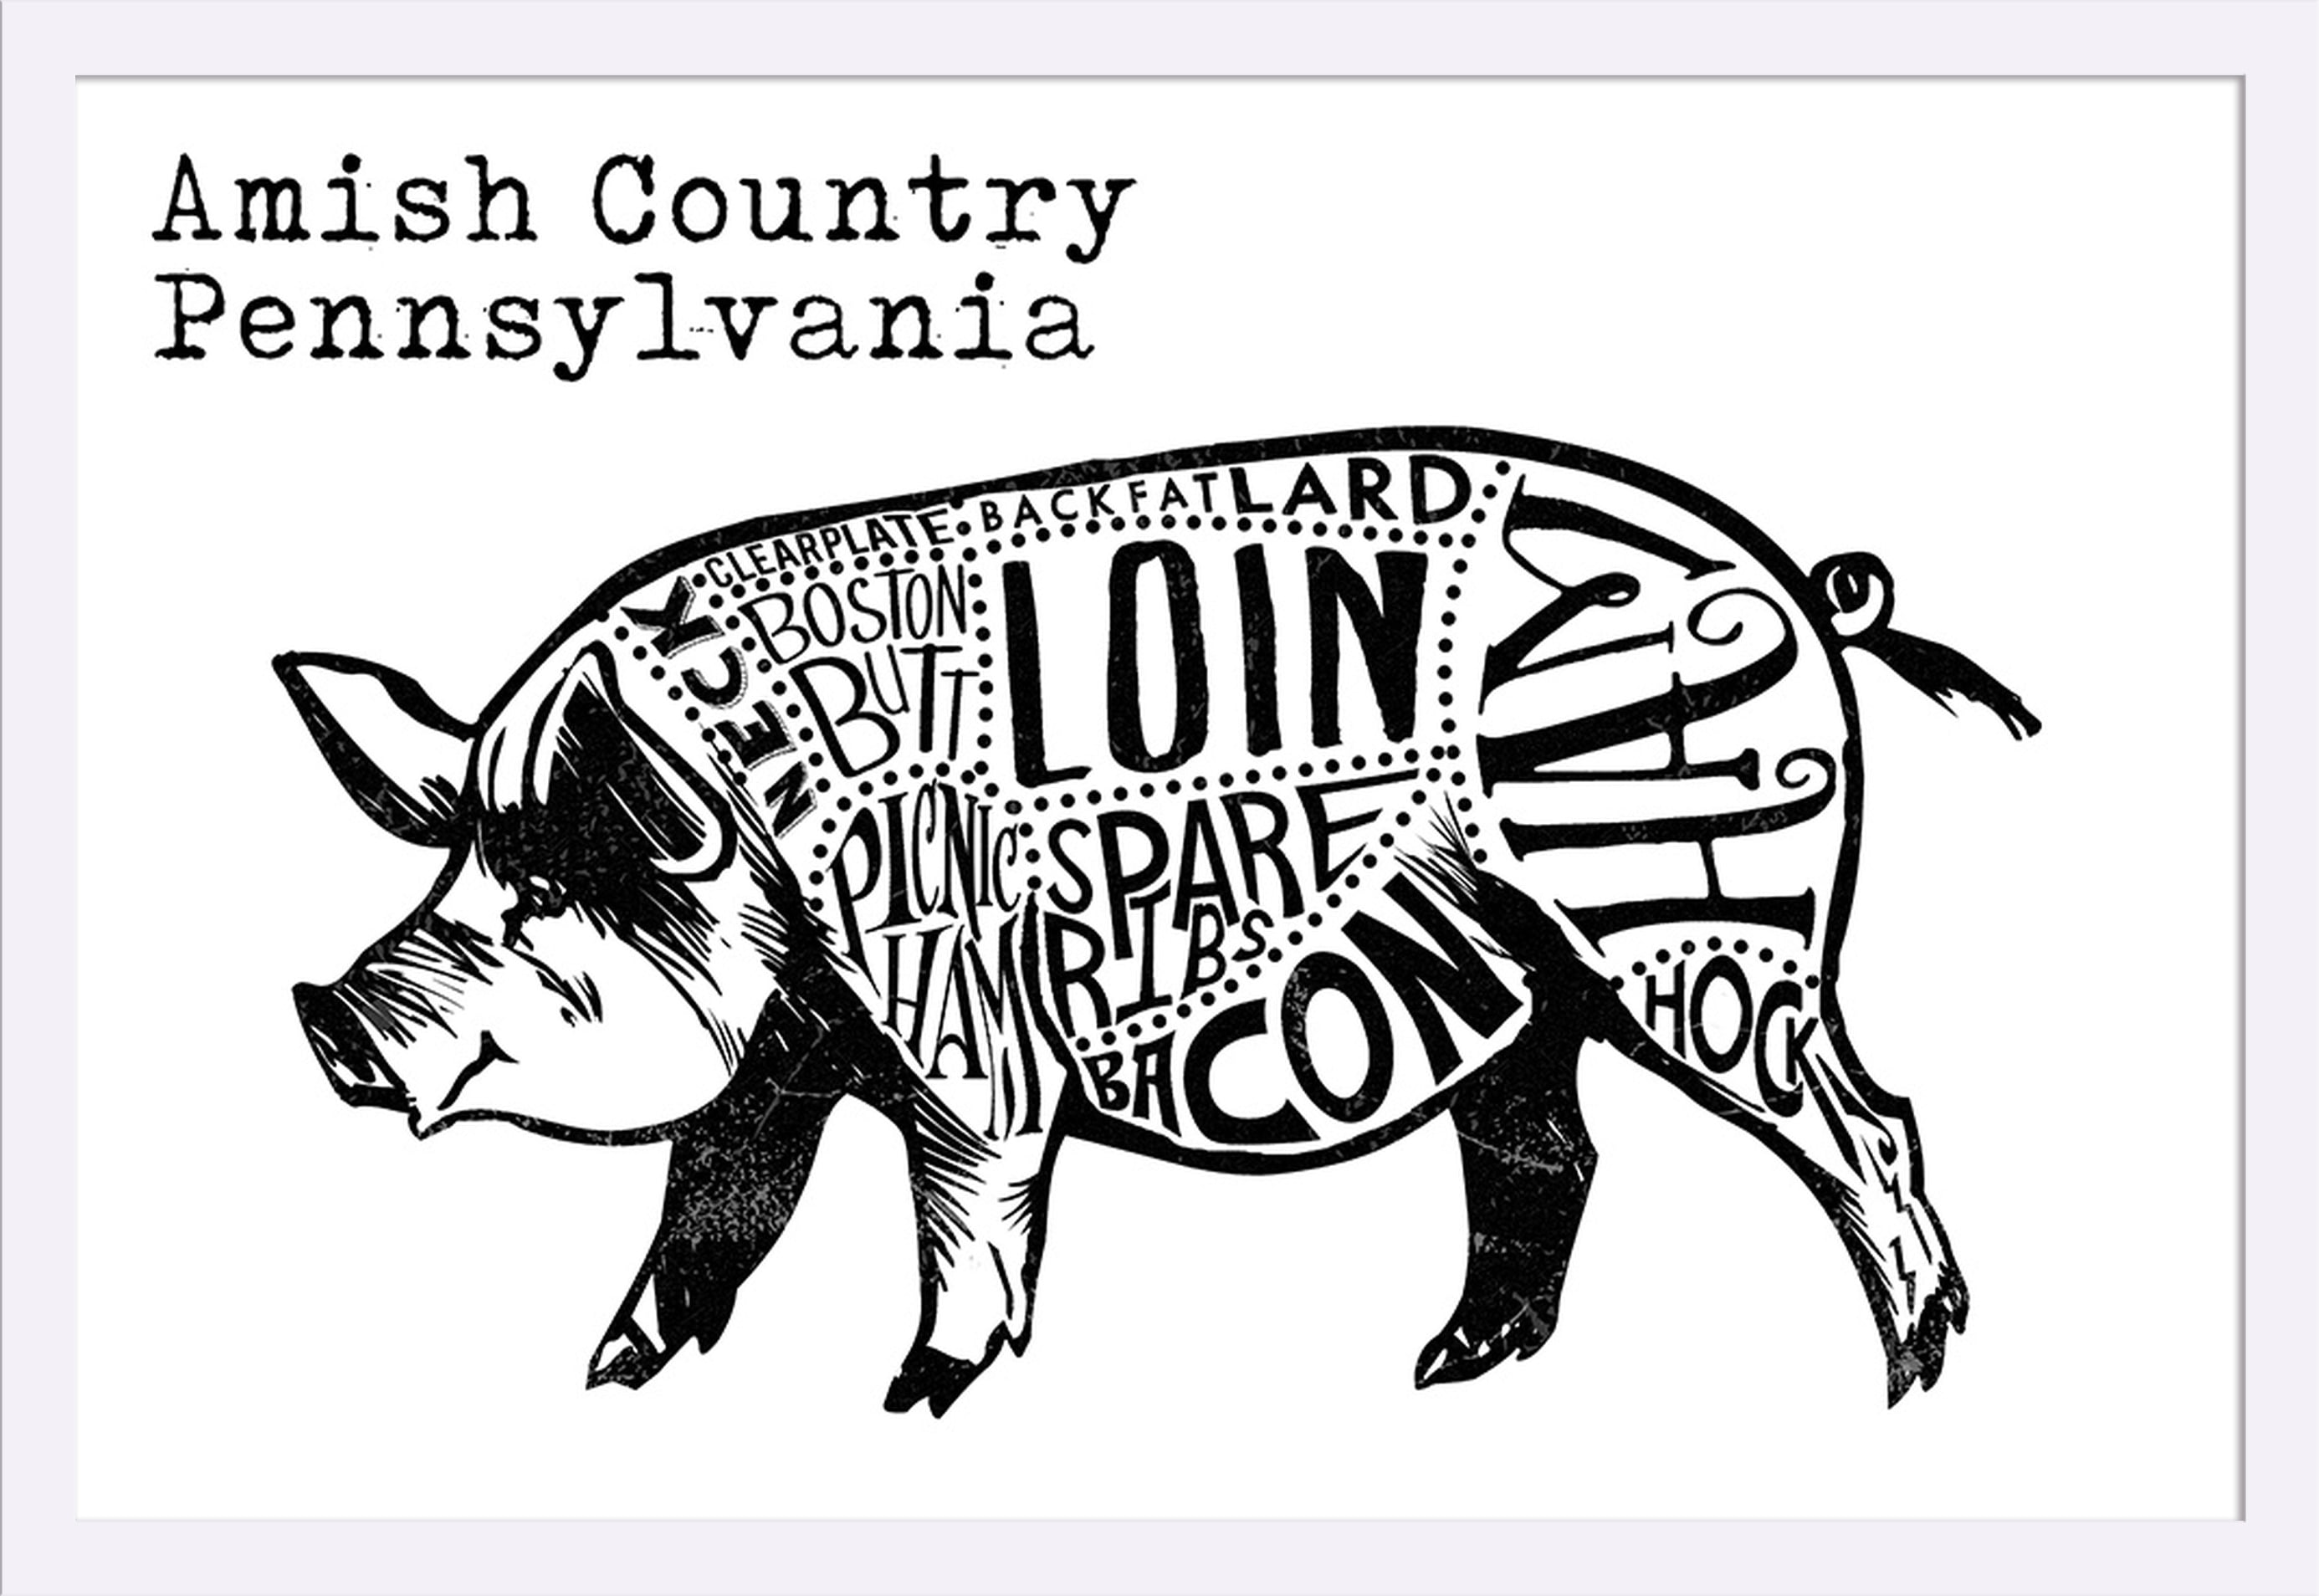 16x24 Giclee Art Print, Gallery Framed, Black Wood Country Kitchen Pig on White 